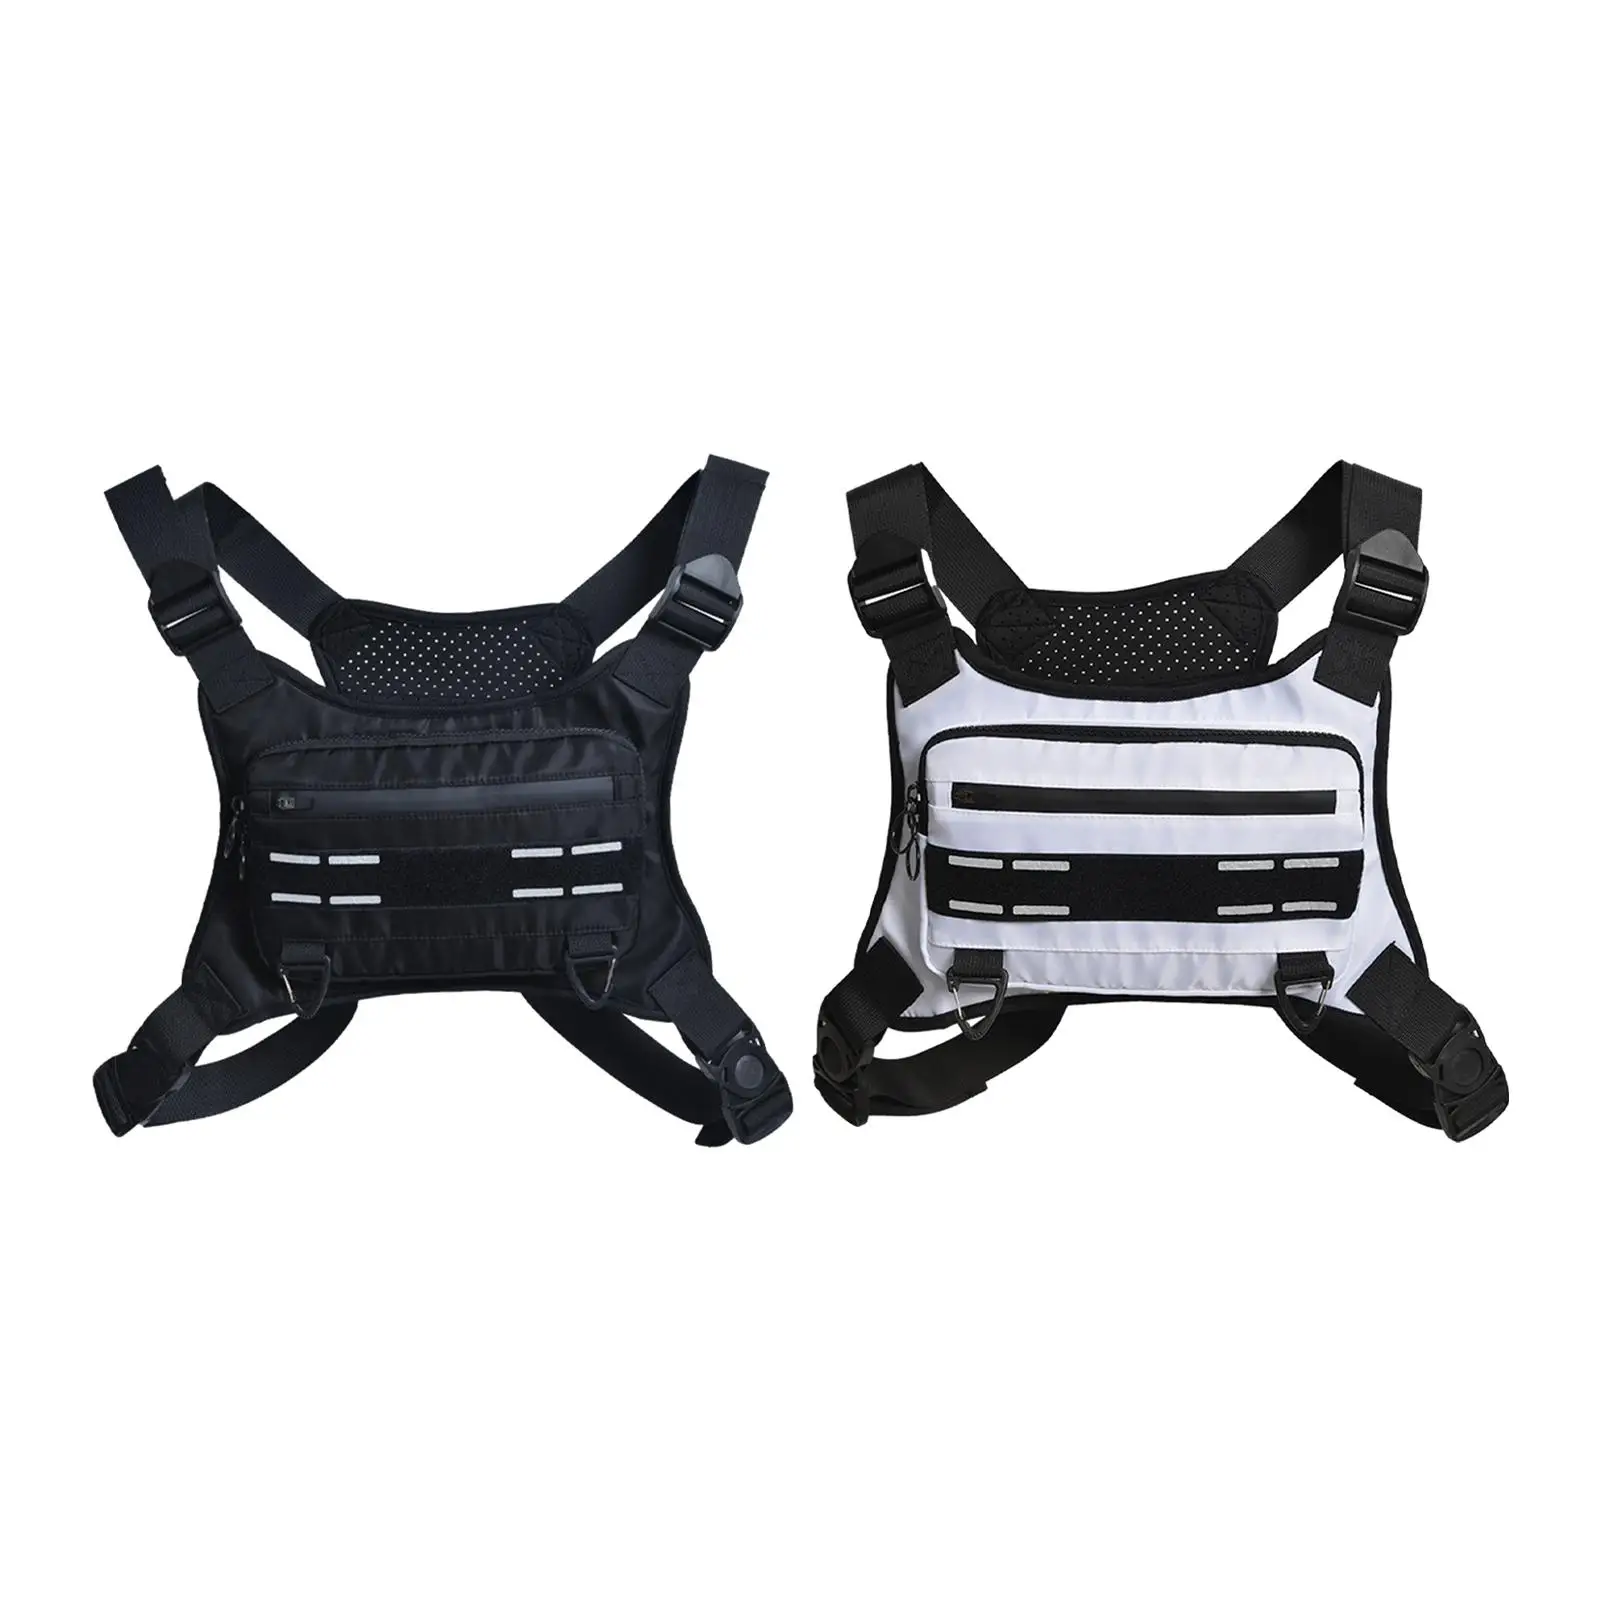 Chest Rig Bag Multifunction Harness Vest Pouch for Camping Sports Hiking